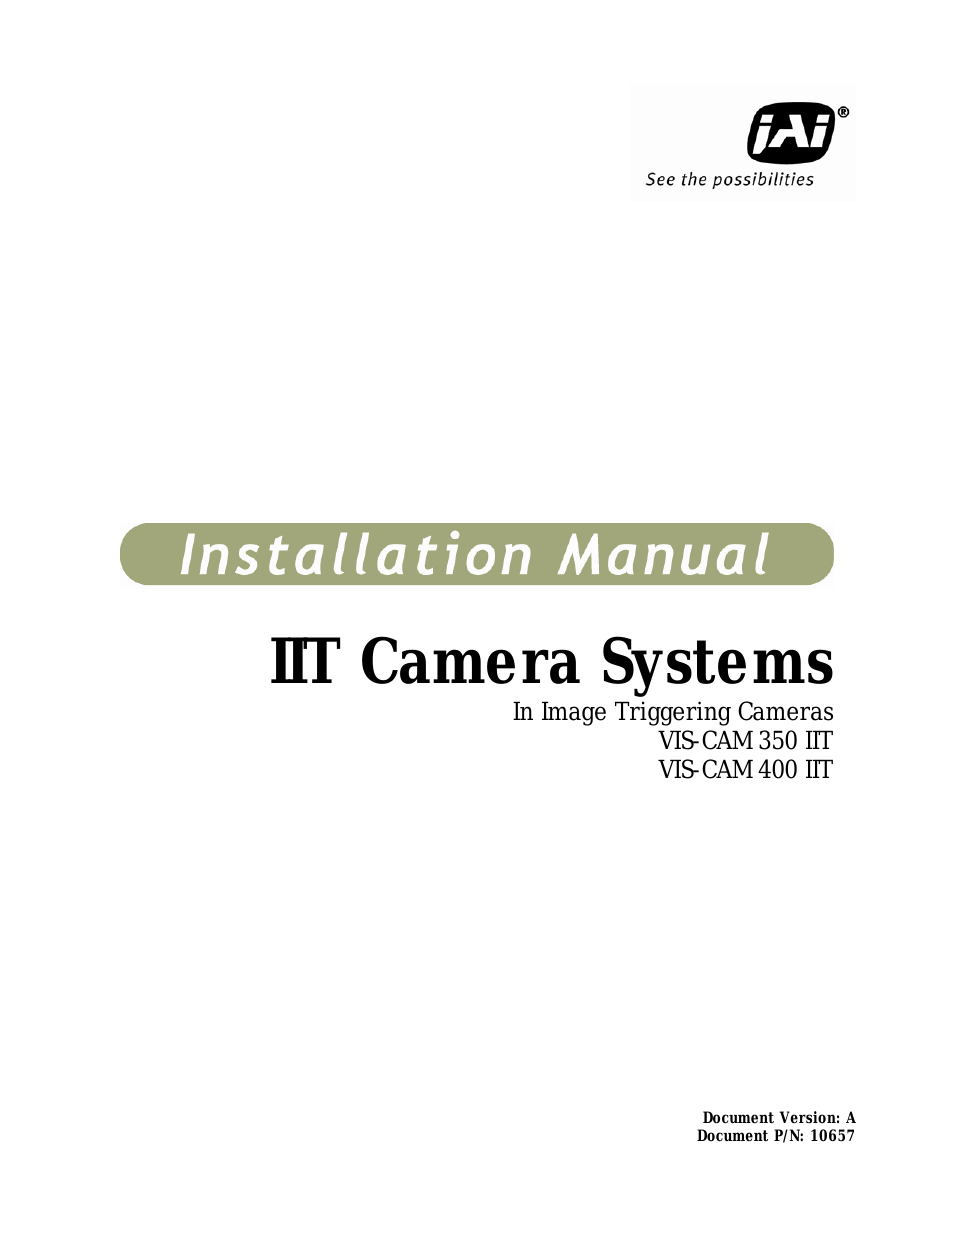 IIT Camera Systems VIS-CAM 350